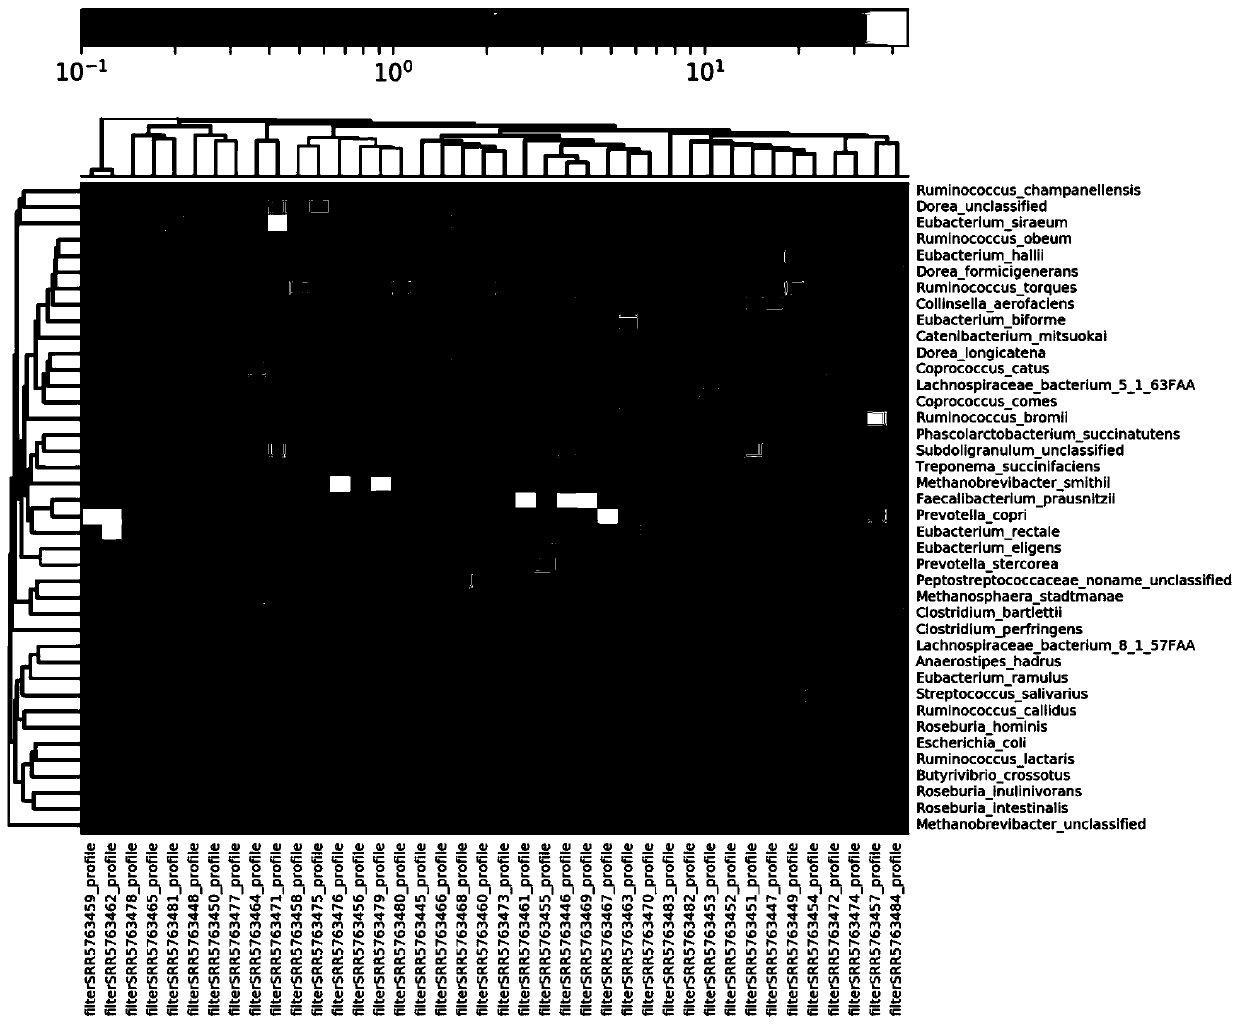 Method for identifying individual intestinal flora types based on SNP